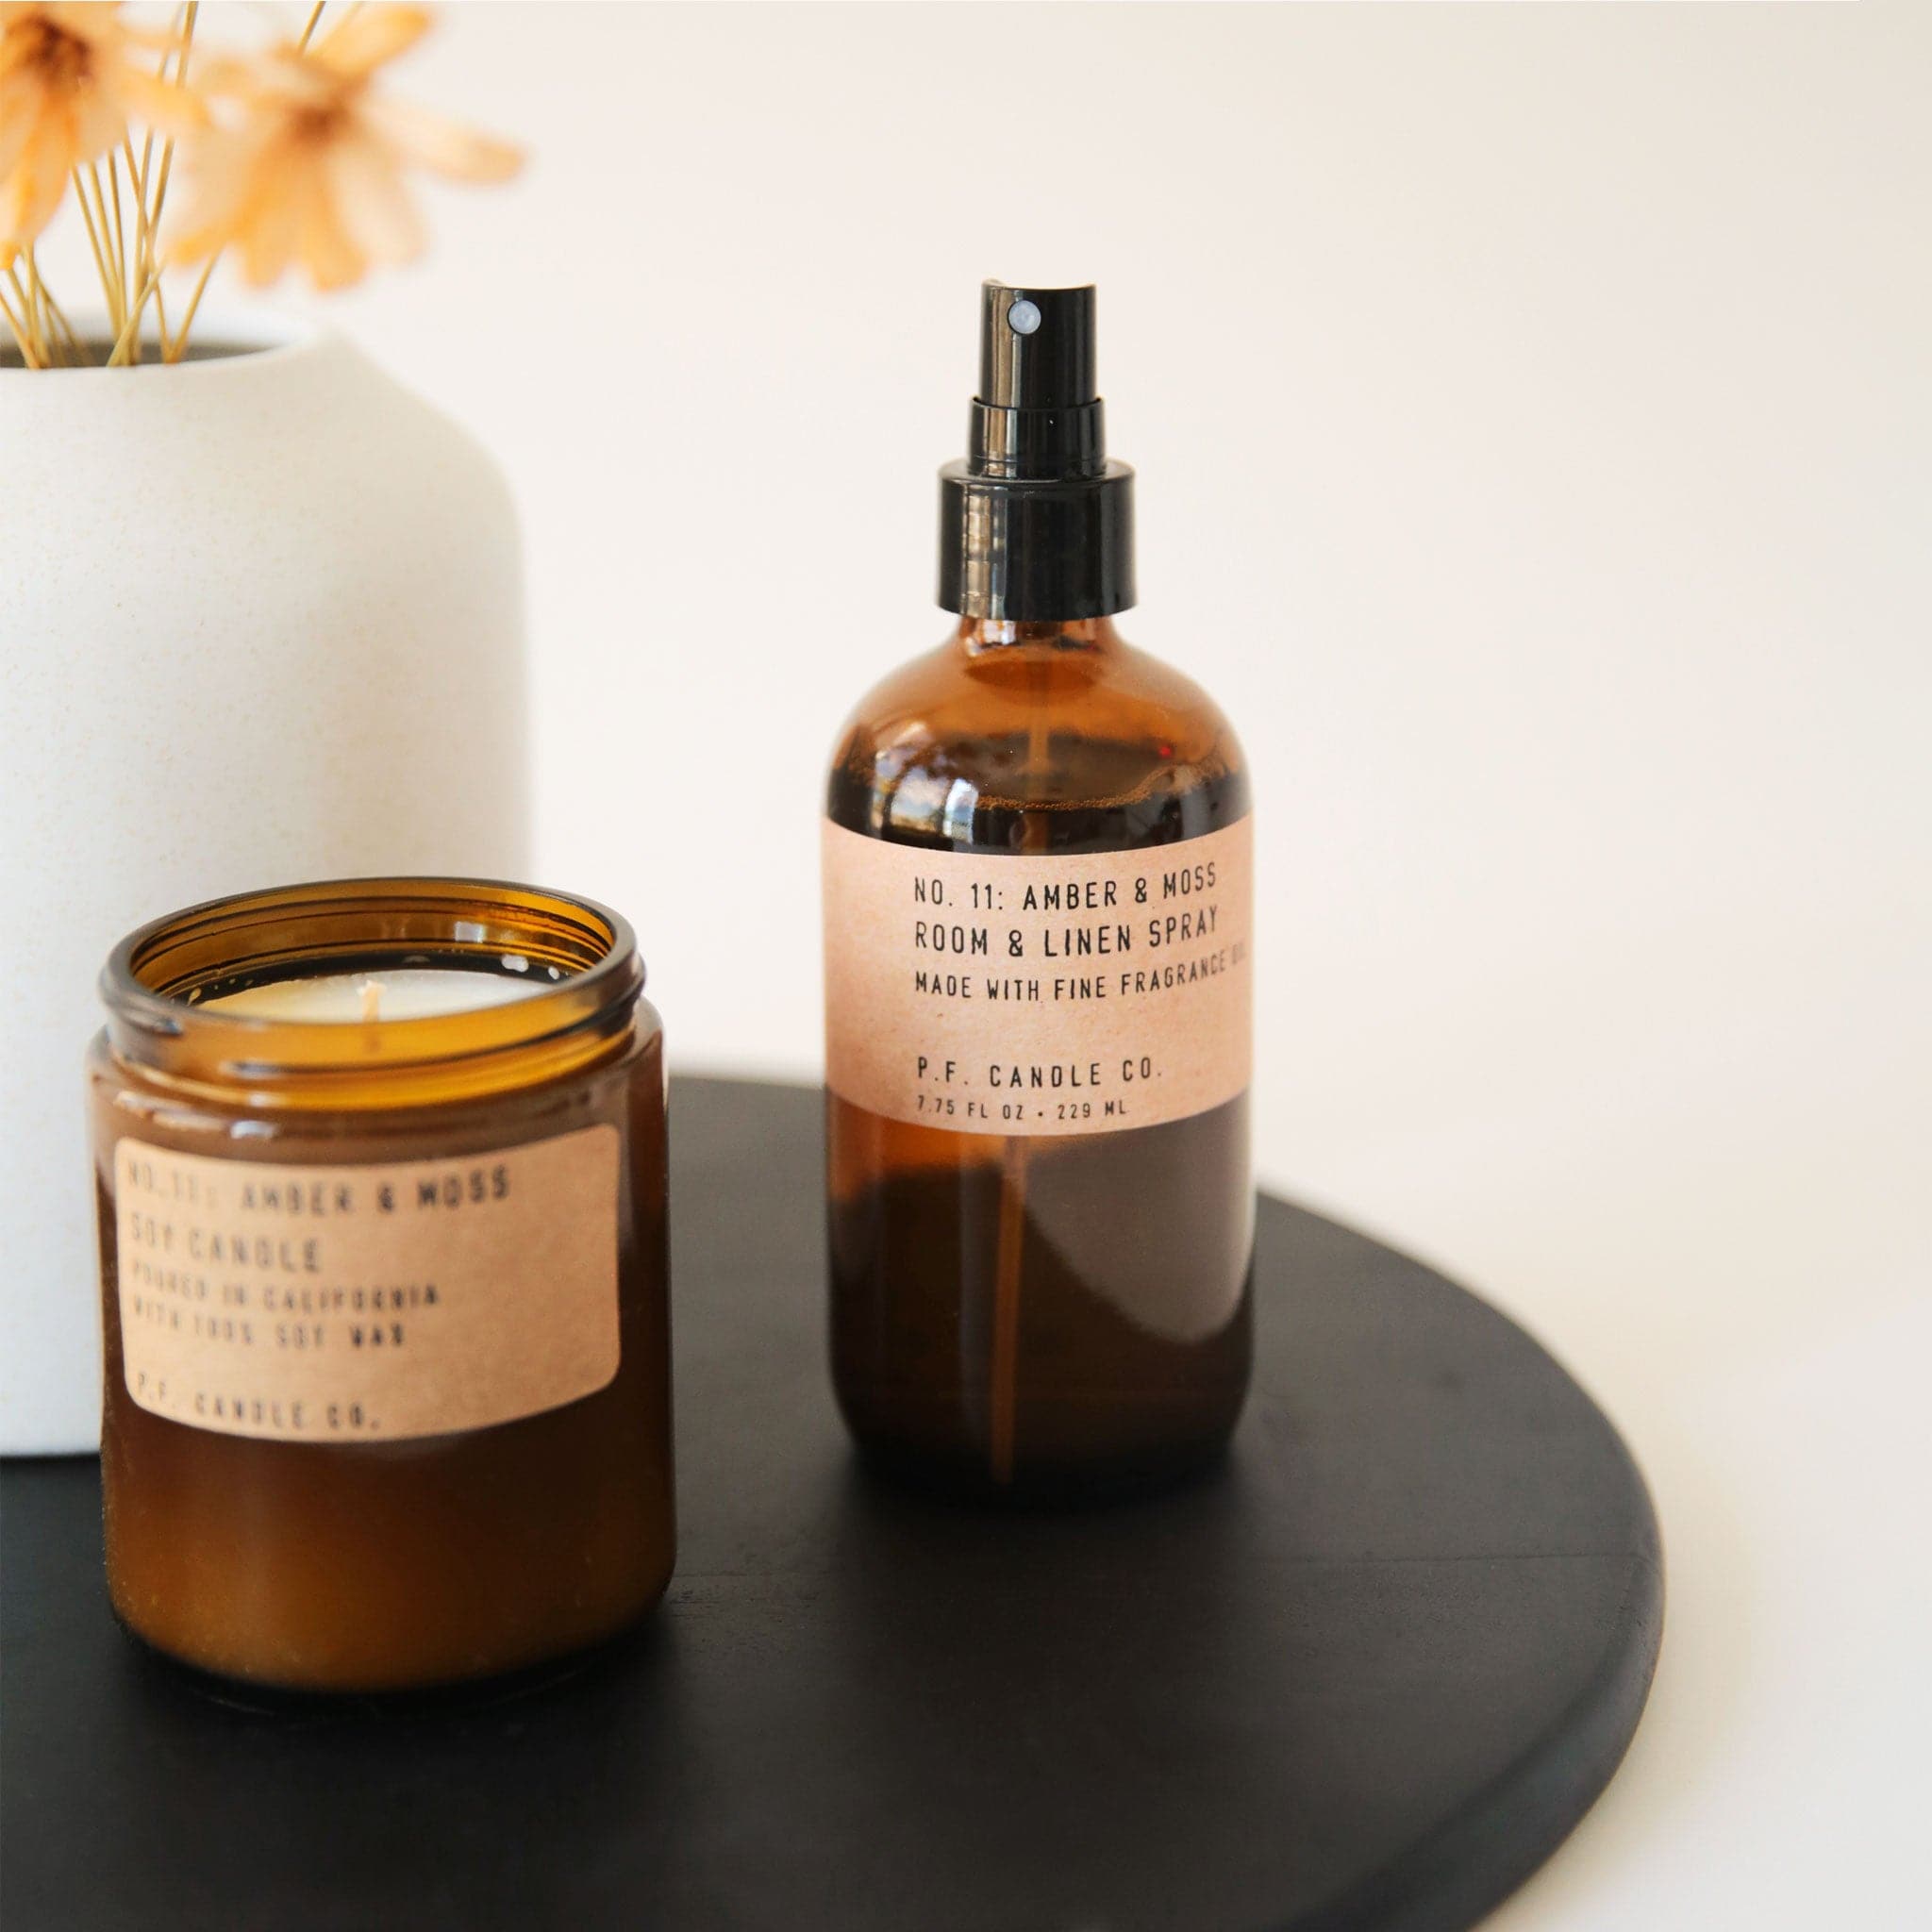 An amber glass spray bottle with a neutral brown label that reads, "No. 11: Amber & Moss Room & Linen Spray. P.F. Candle Co." staged on a black tray with a candle to the left of it.